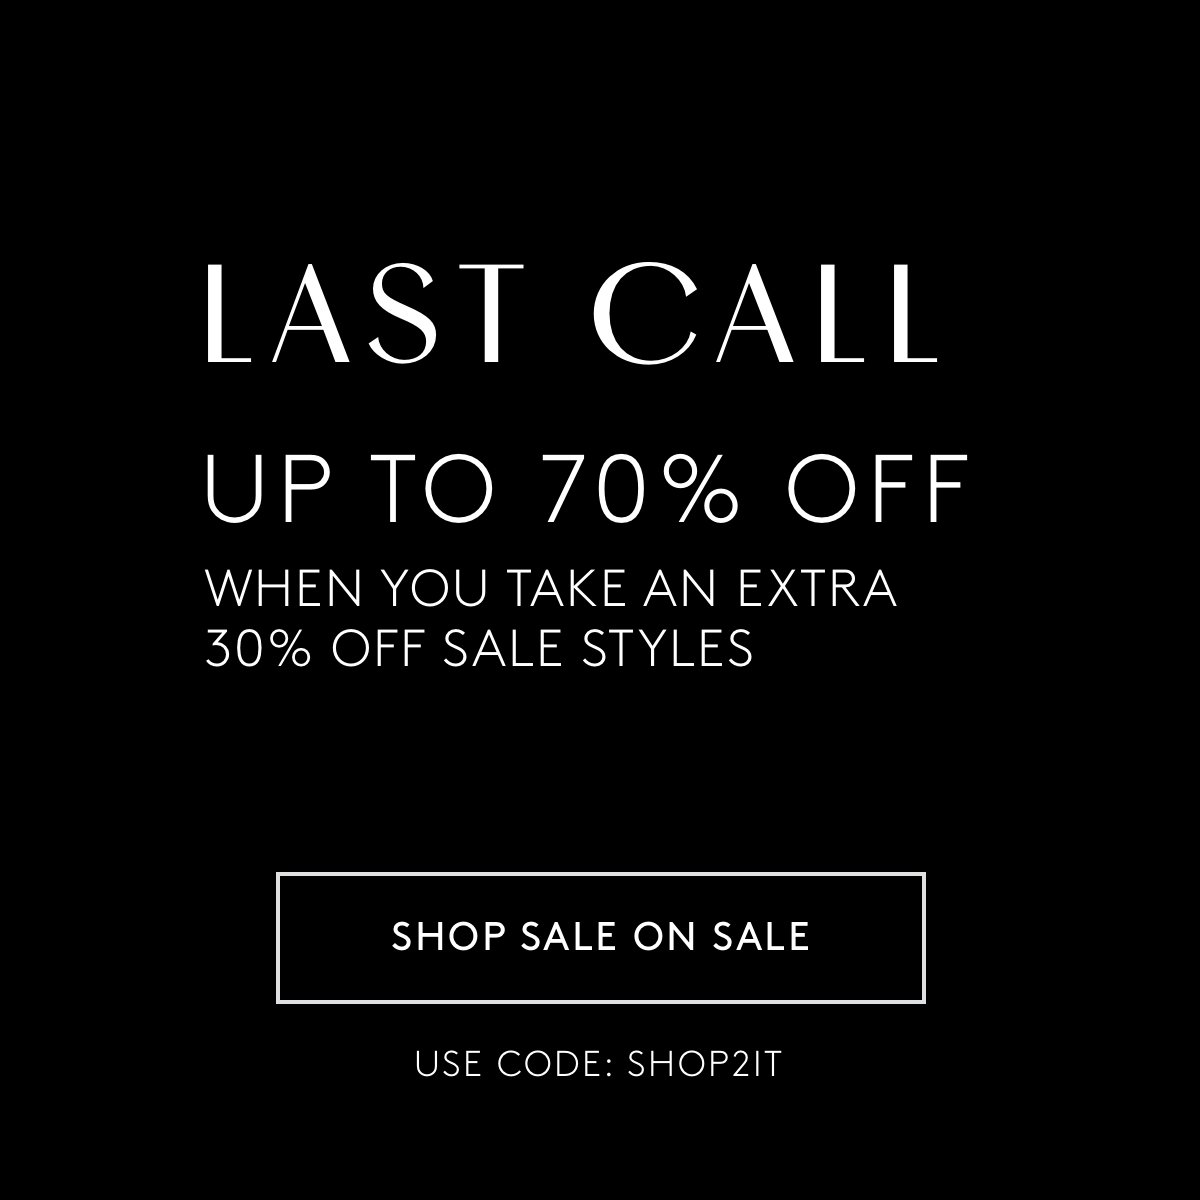 LAST CALL  UP TO 70% OFF  USE CODE: SHOP2IT  When you take an extra 30% off sale styles*  SHOP SALE ON SALE